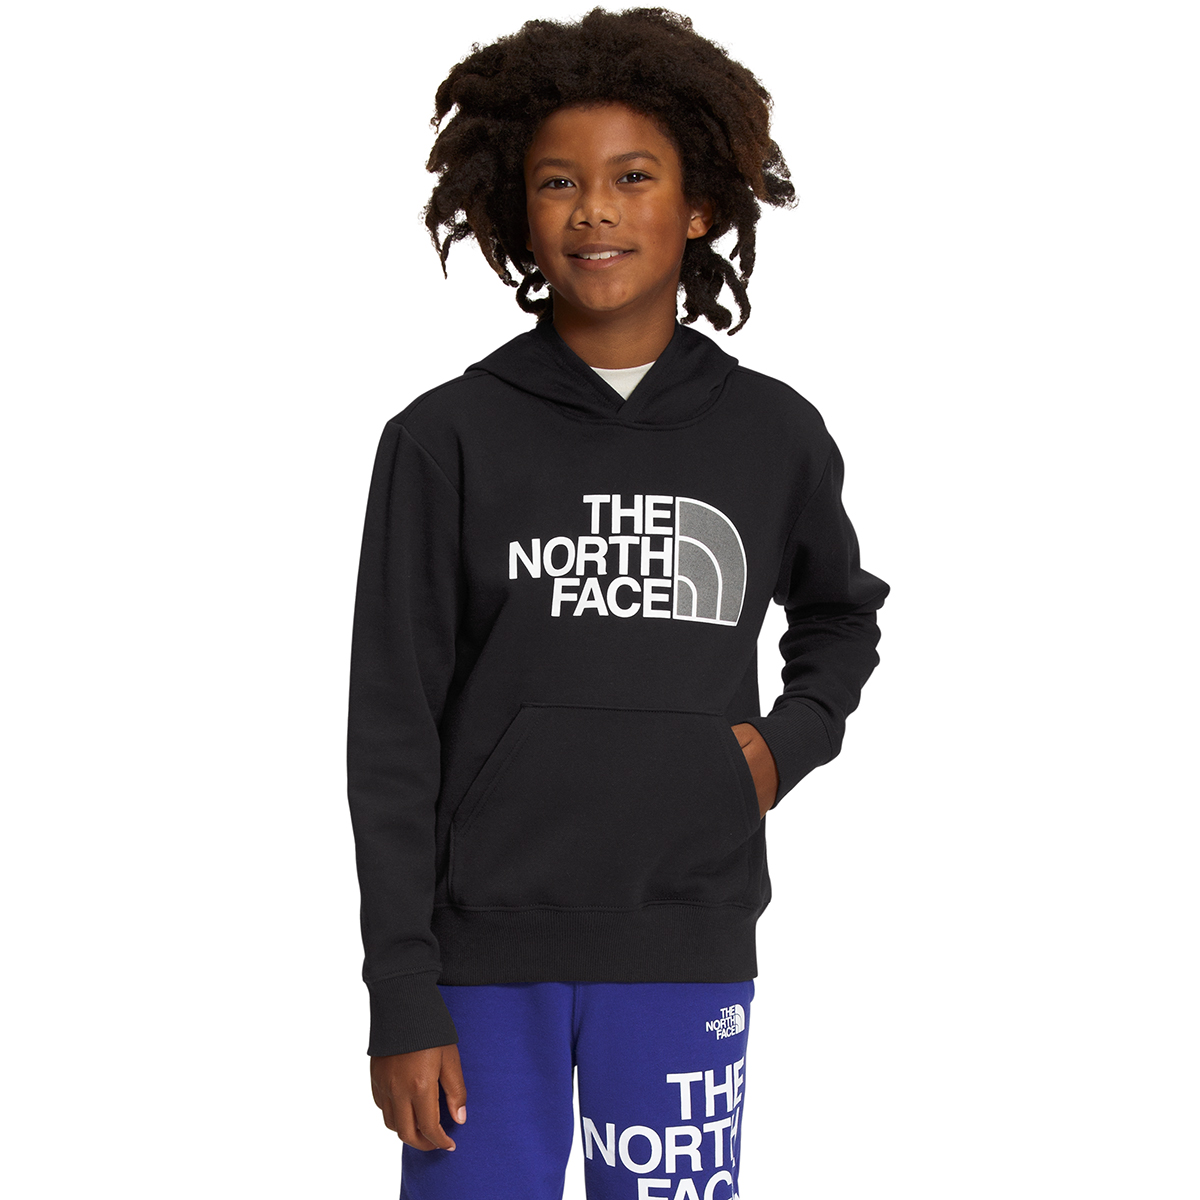 The North Face Boys Camp Fleece Pullover Hoodie - Size S